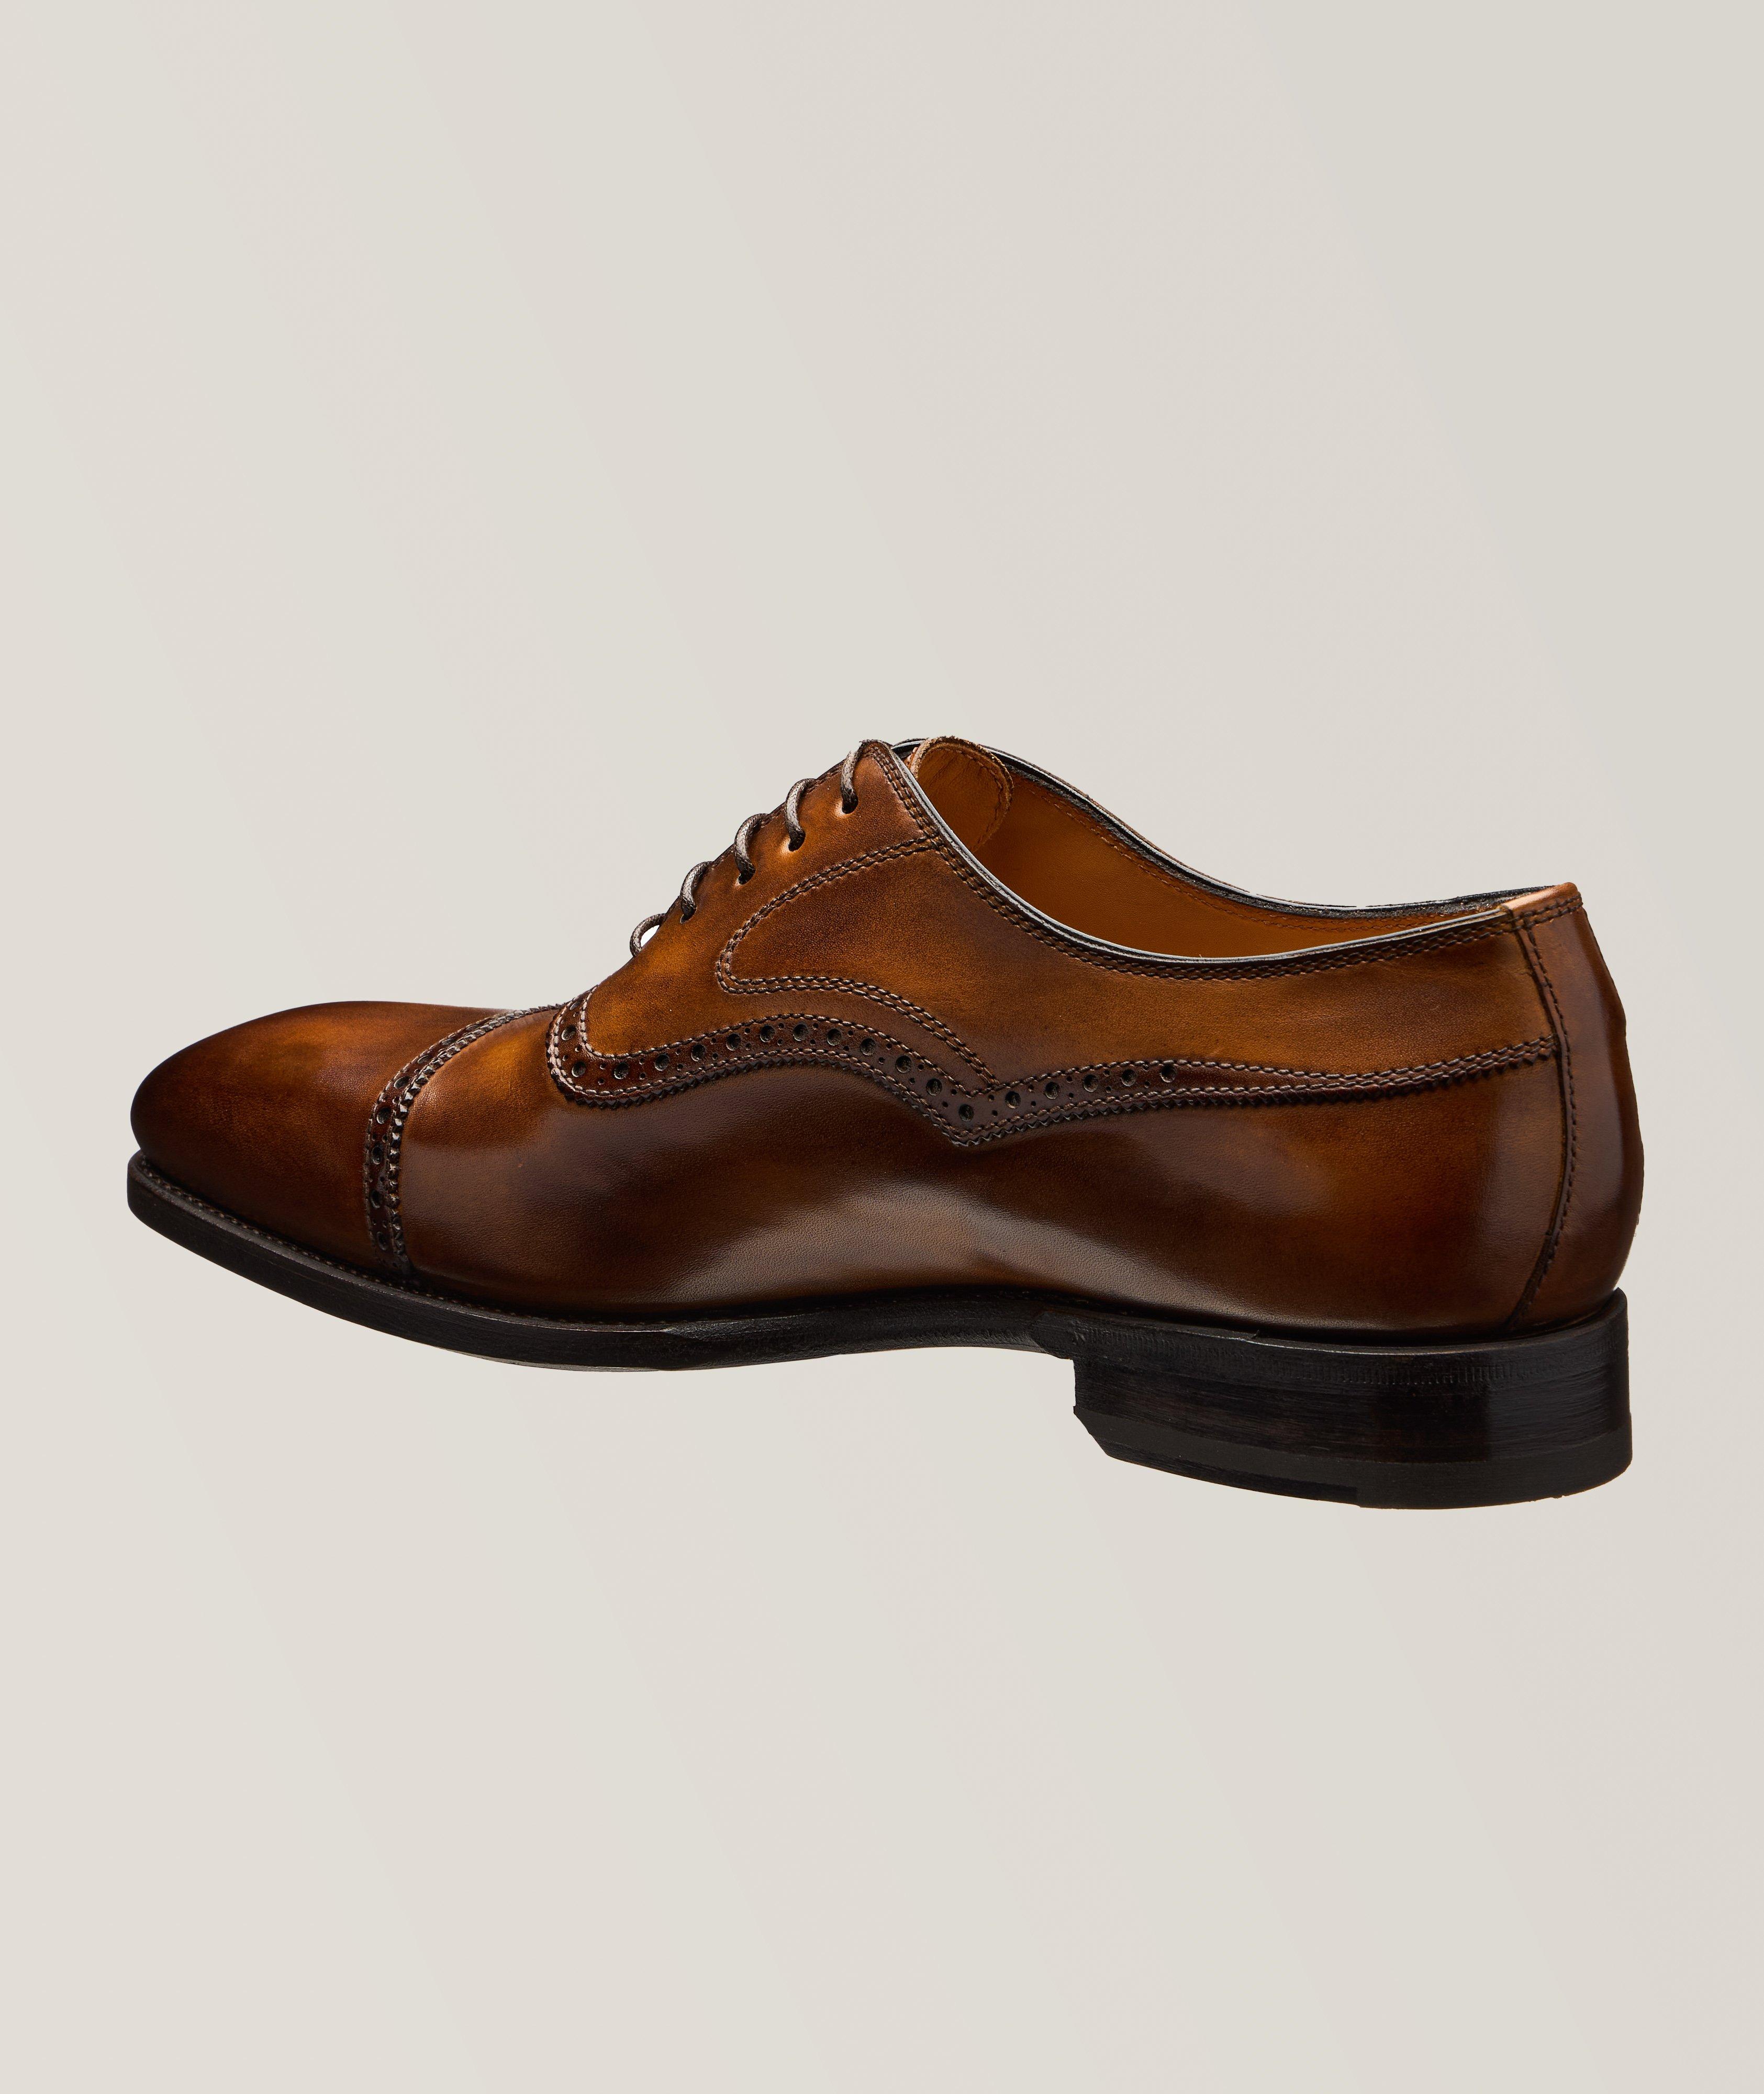 Luciano ll Leather Oxford Captoe  image 1